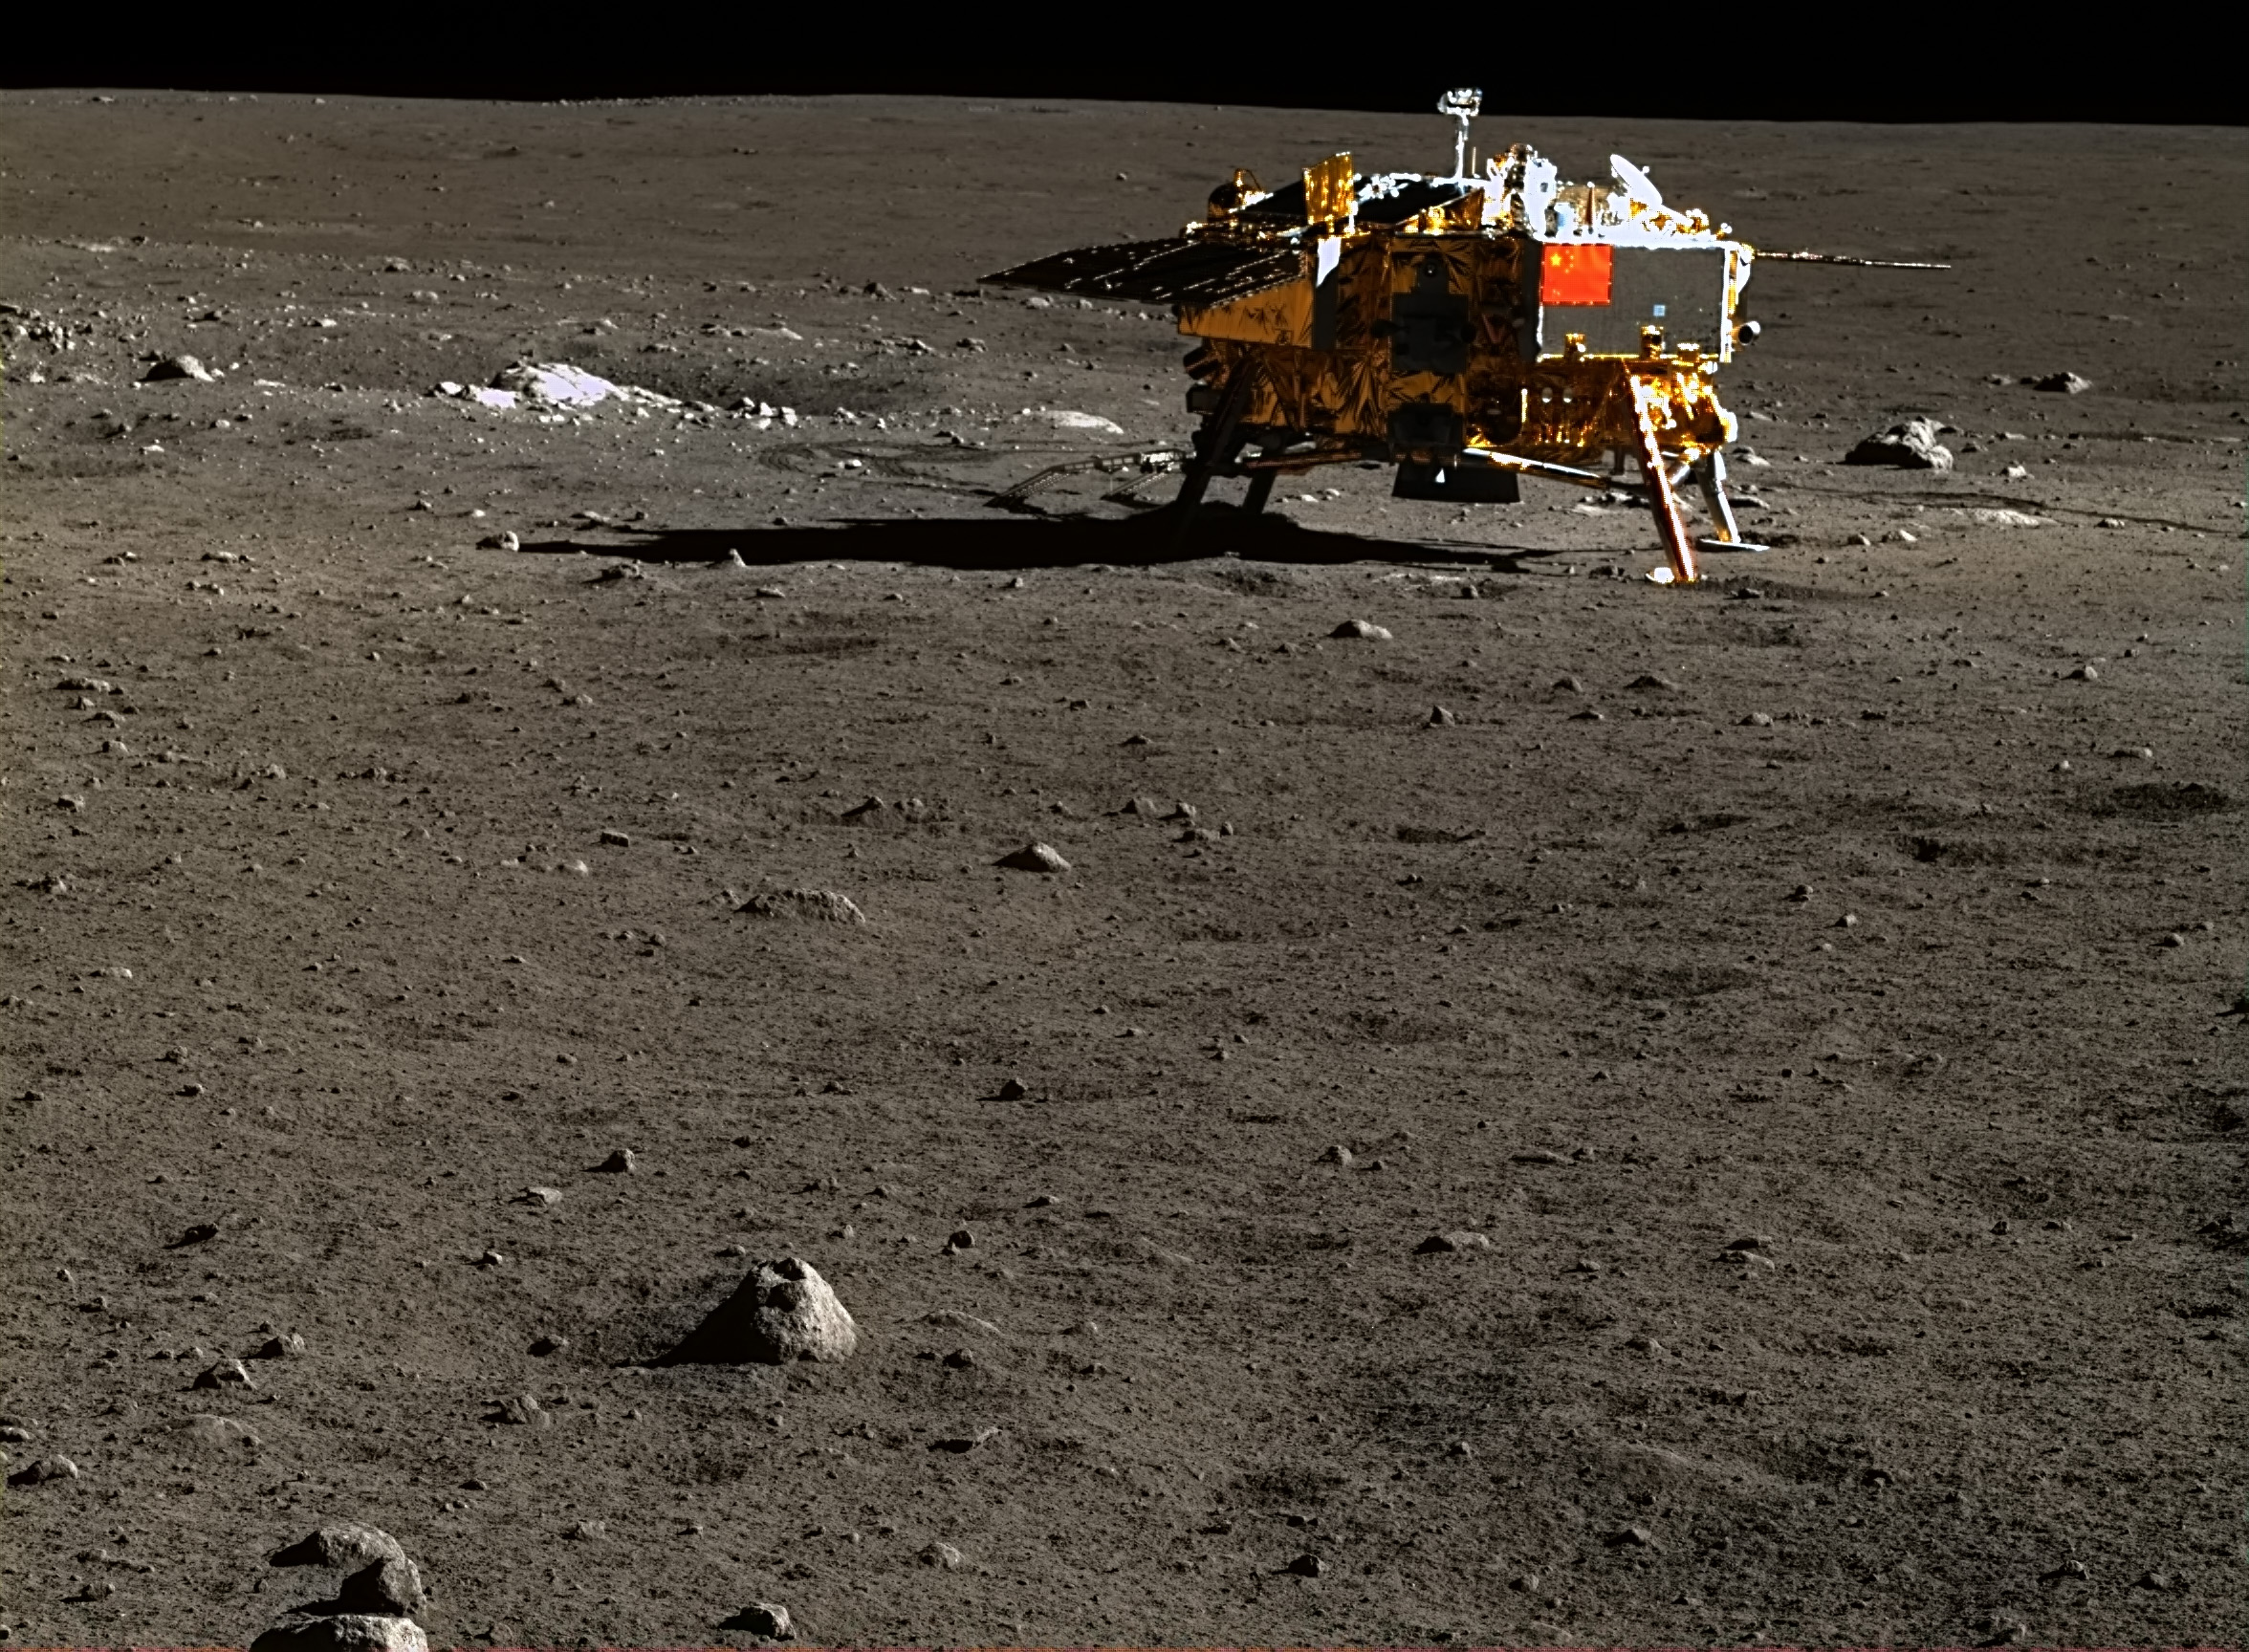 Chang'e 3 lander on the Moon in colour